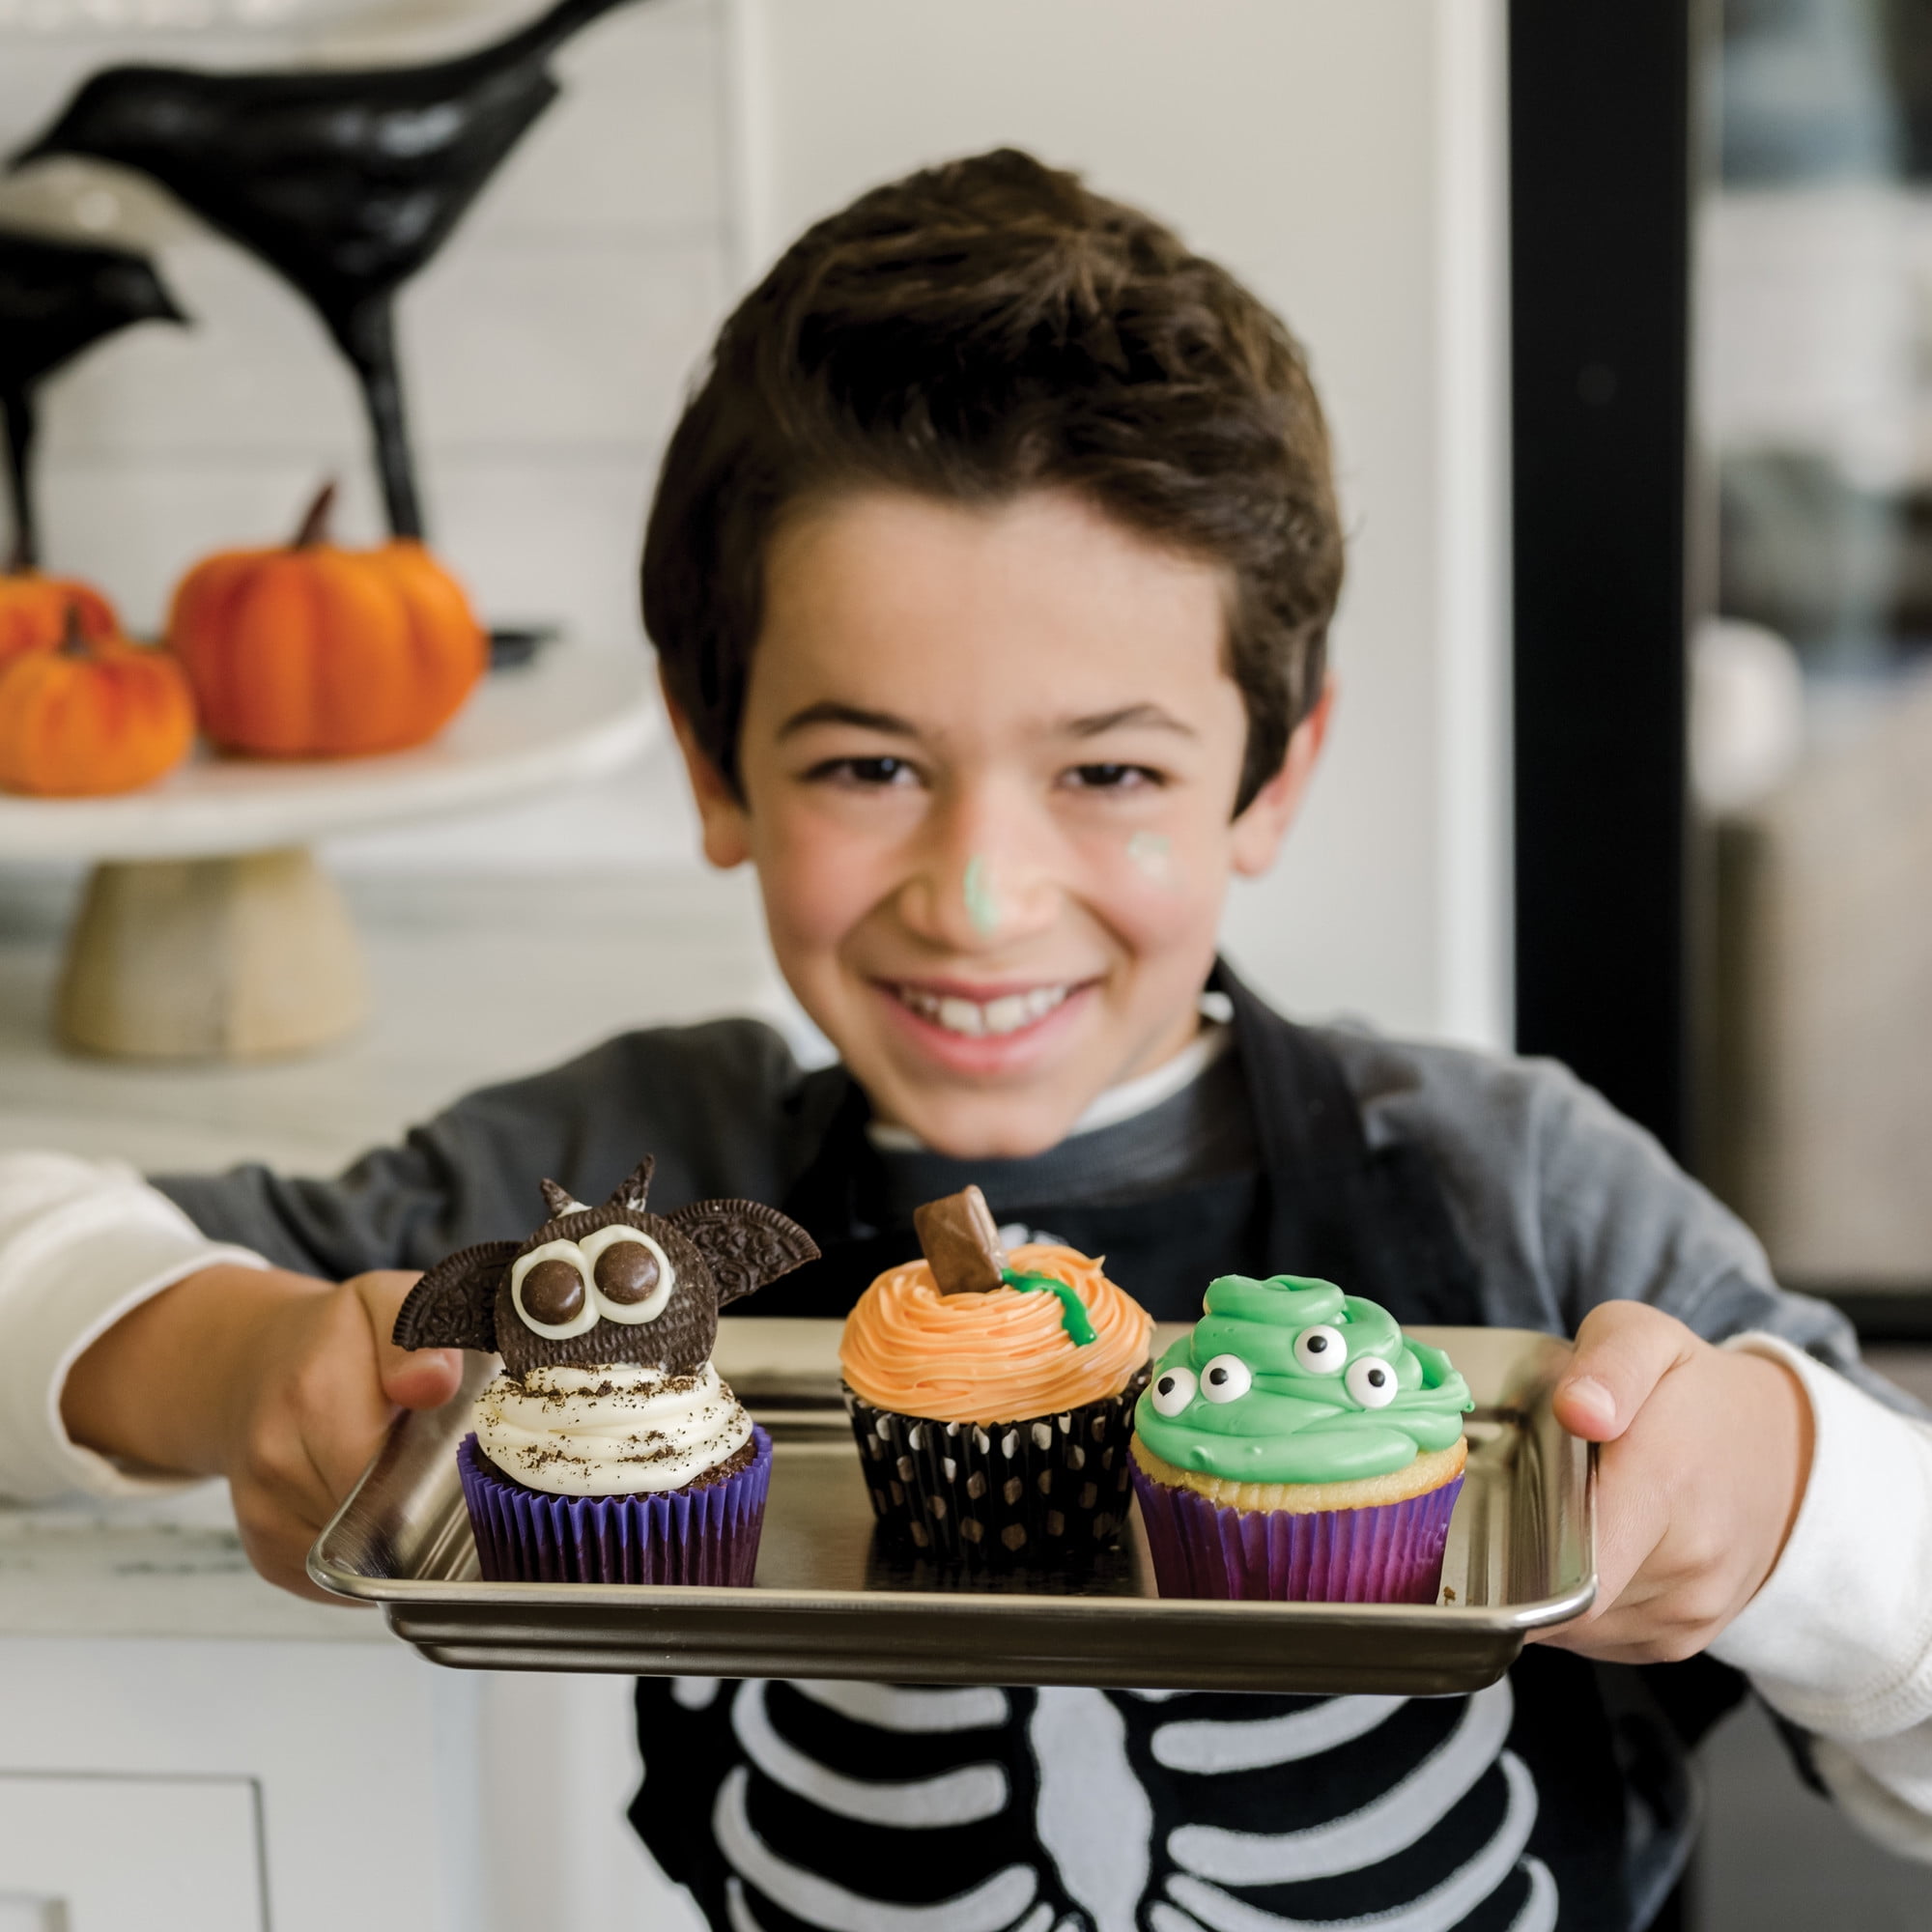 Playful Chef: Master Series- Baking Challenge Kit – 4 Kids Only